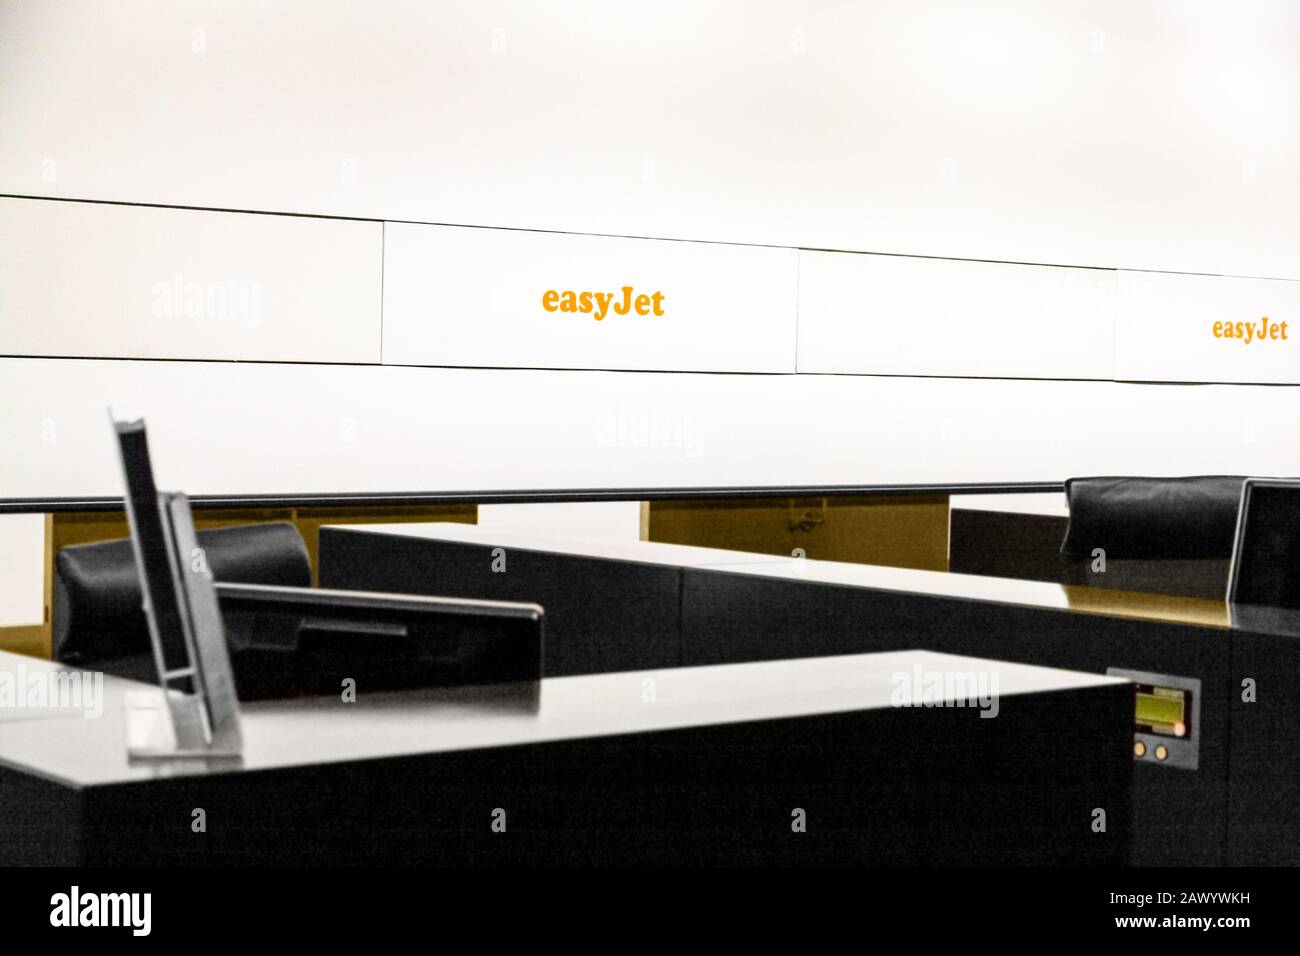 Zurich, Switzerland - June 11, 2017: Check-in counter of airline company easyjet at airport Zurich Stock Photo